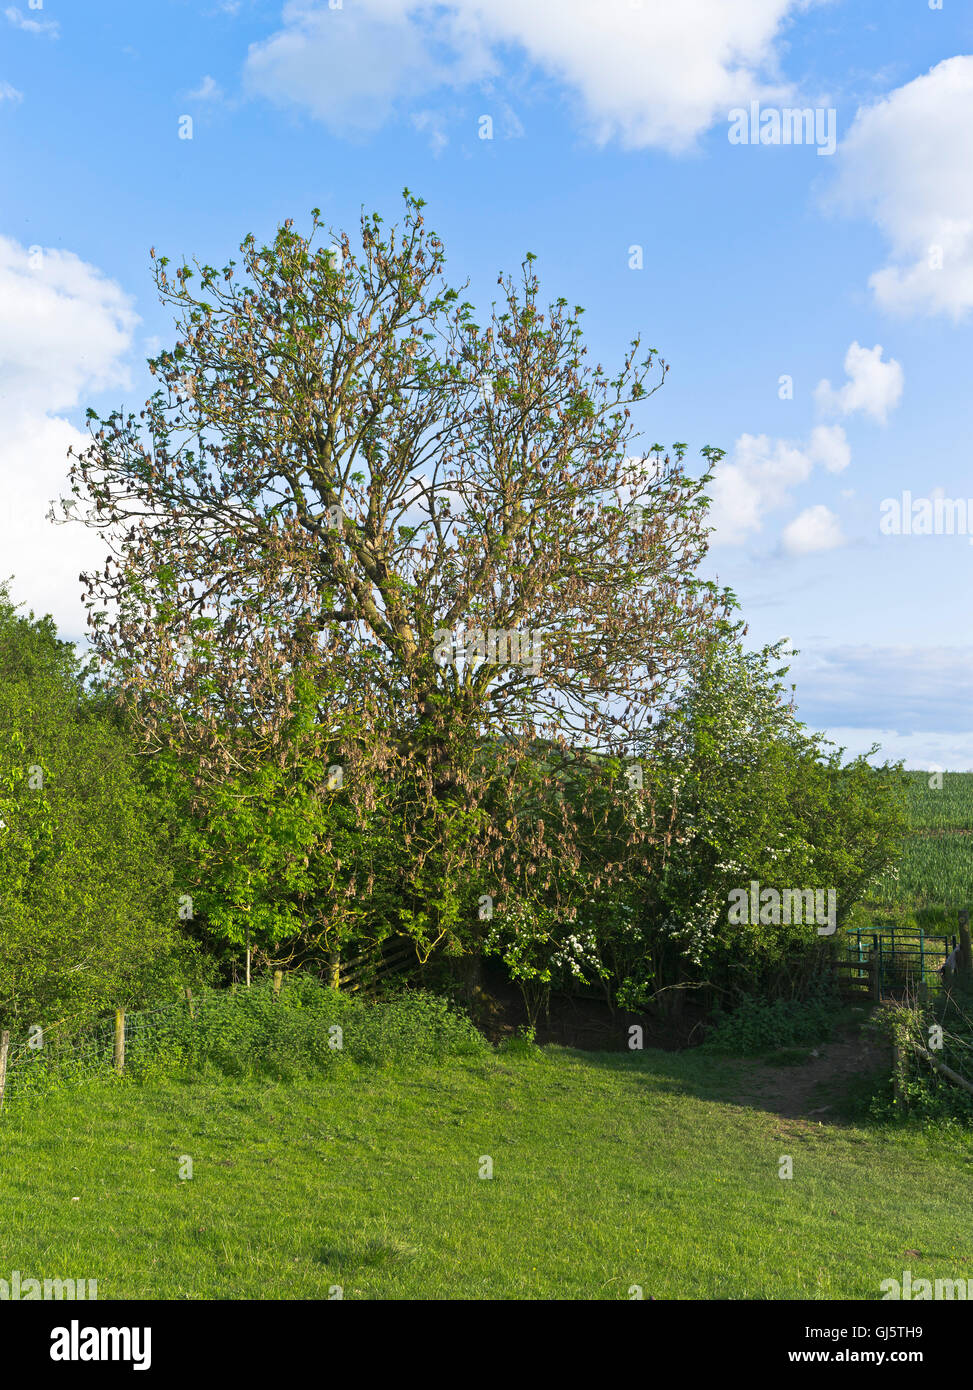 dh Horse chestnut TREE UK Withered Horse chestnut tree diseased aesculus hippocastanum trees dying disease Stock Photo